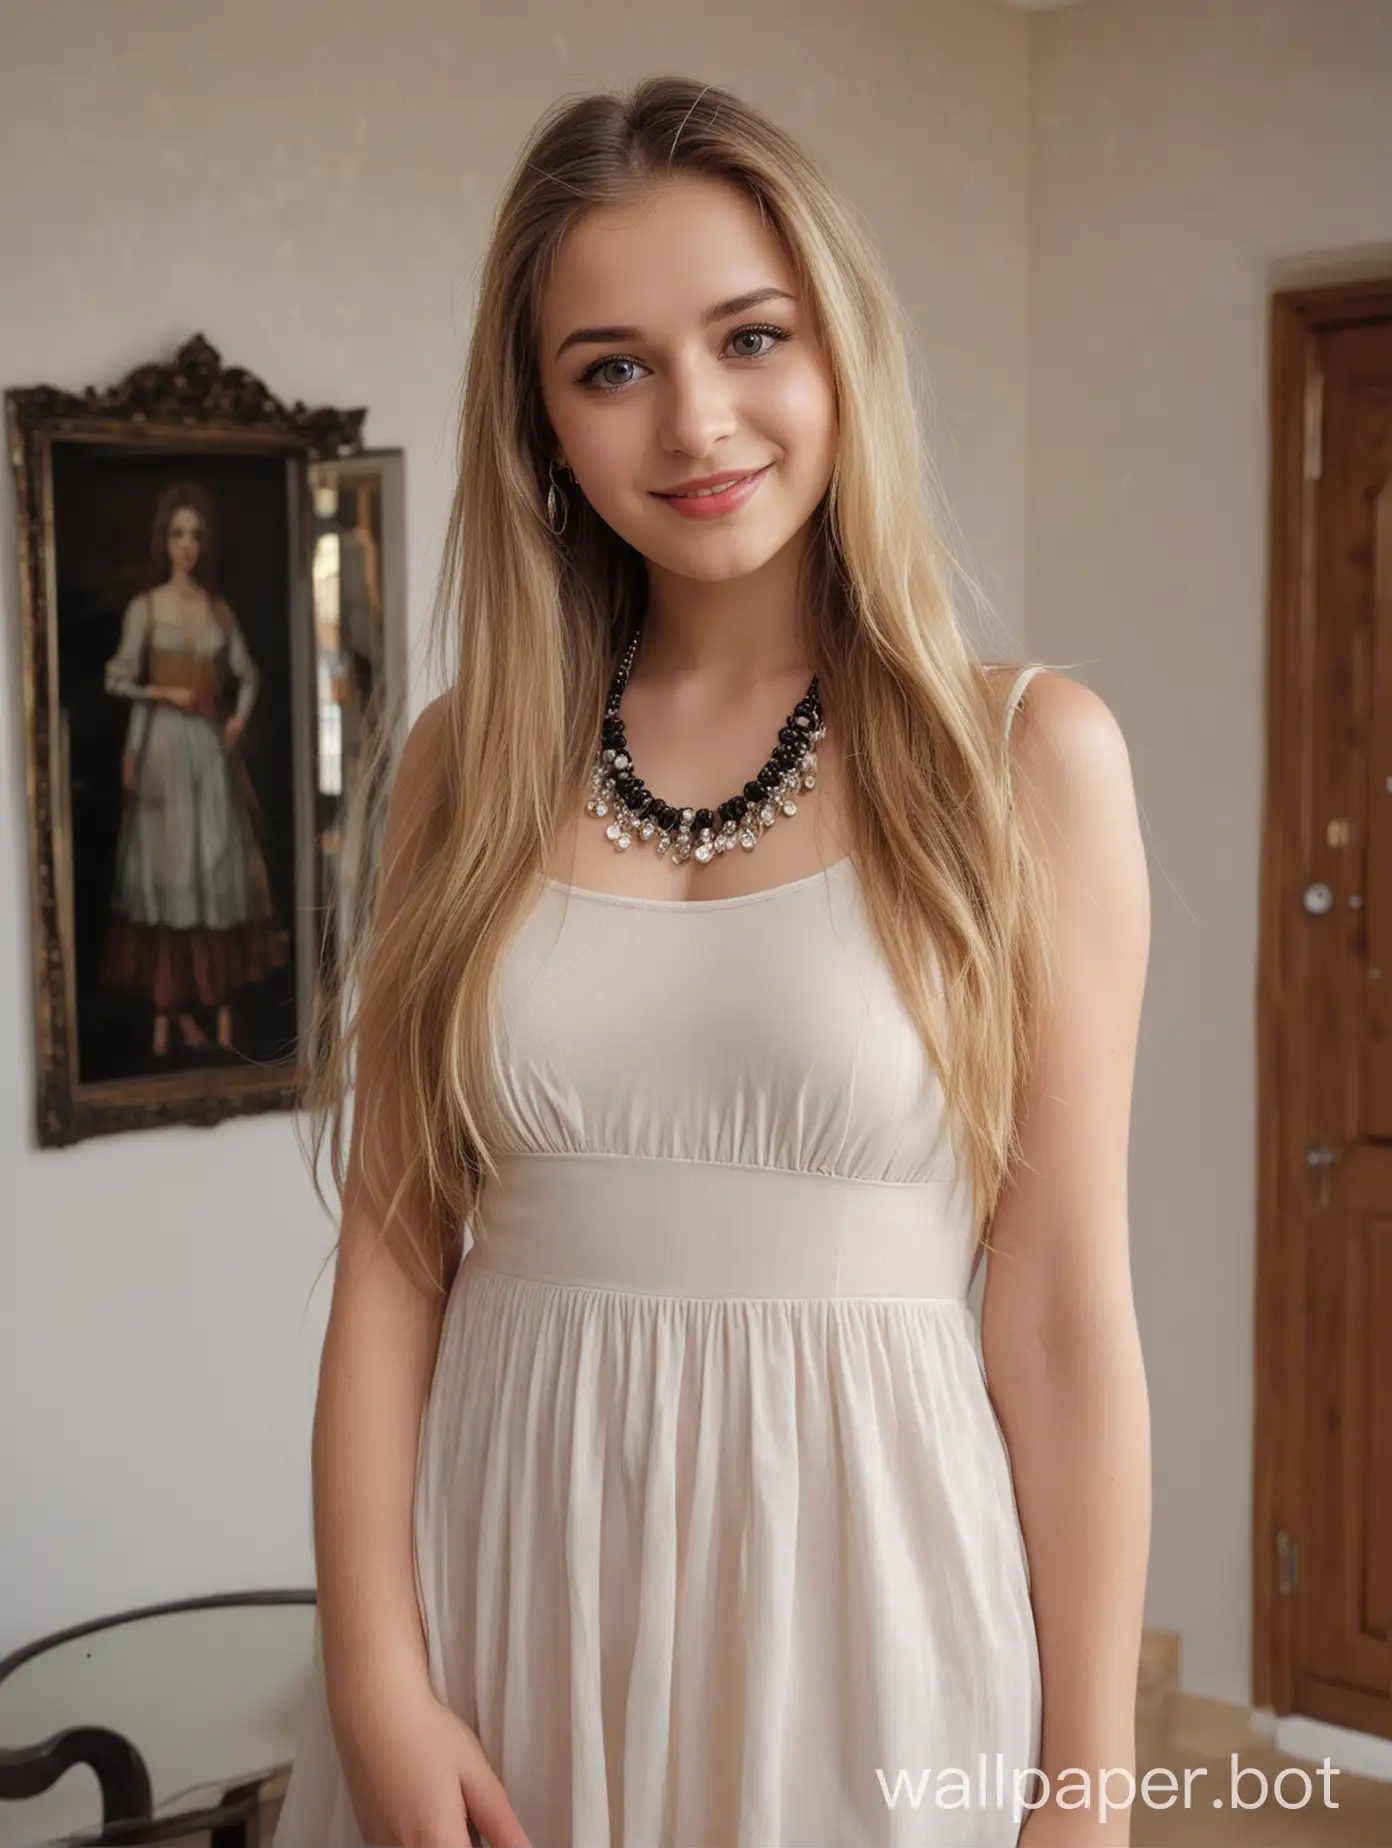 Generate an image of most beautiful Czech Republic Liberec actress 21 year old cute pretty girl big tits , wearing  Sheath Dress Transparent  ,  with a fair white skin tone and long hair black. She has a round face smile . The background is a modern house interior. The camera shot captures her from head to stomach . She is wearing makeup and has a necklace , jhumka ear ring and bracelet on.